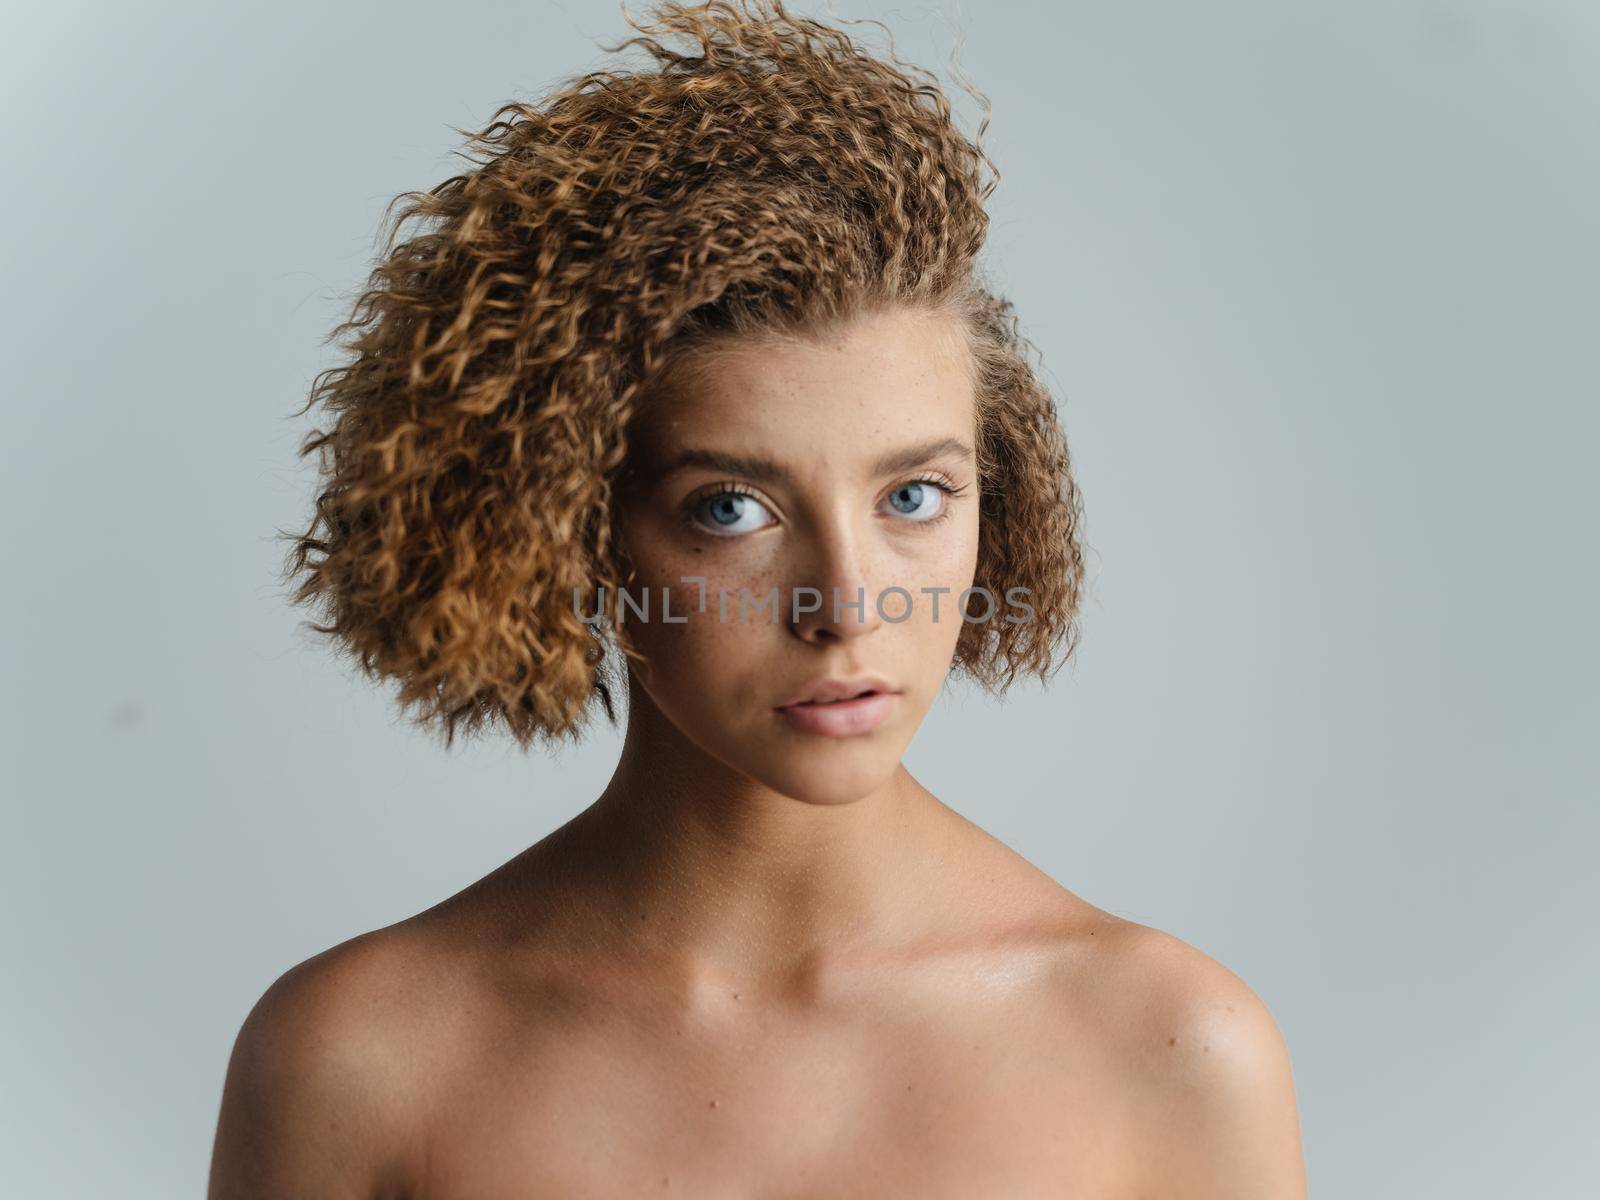 Woman with hair naked shoulders clean skin cosmetics model. High quality photo